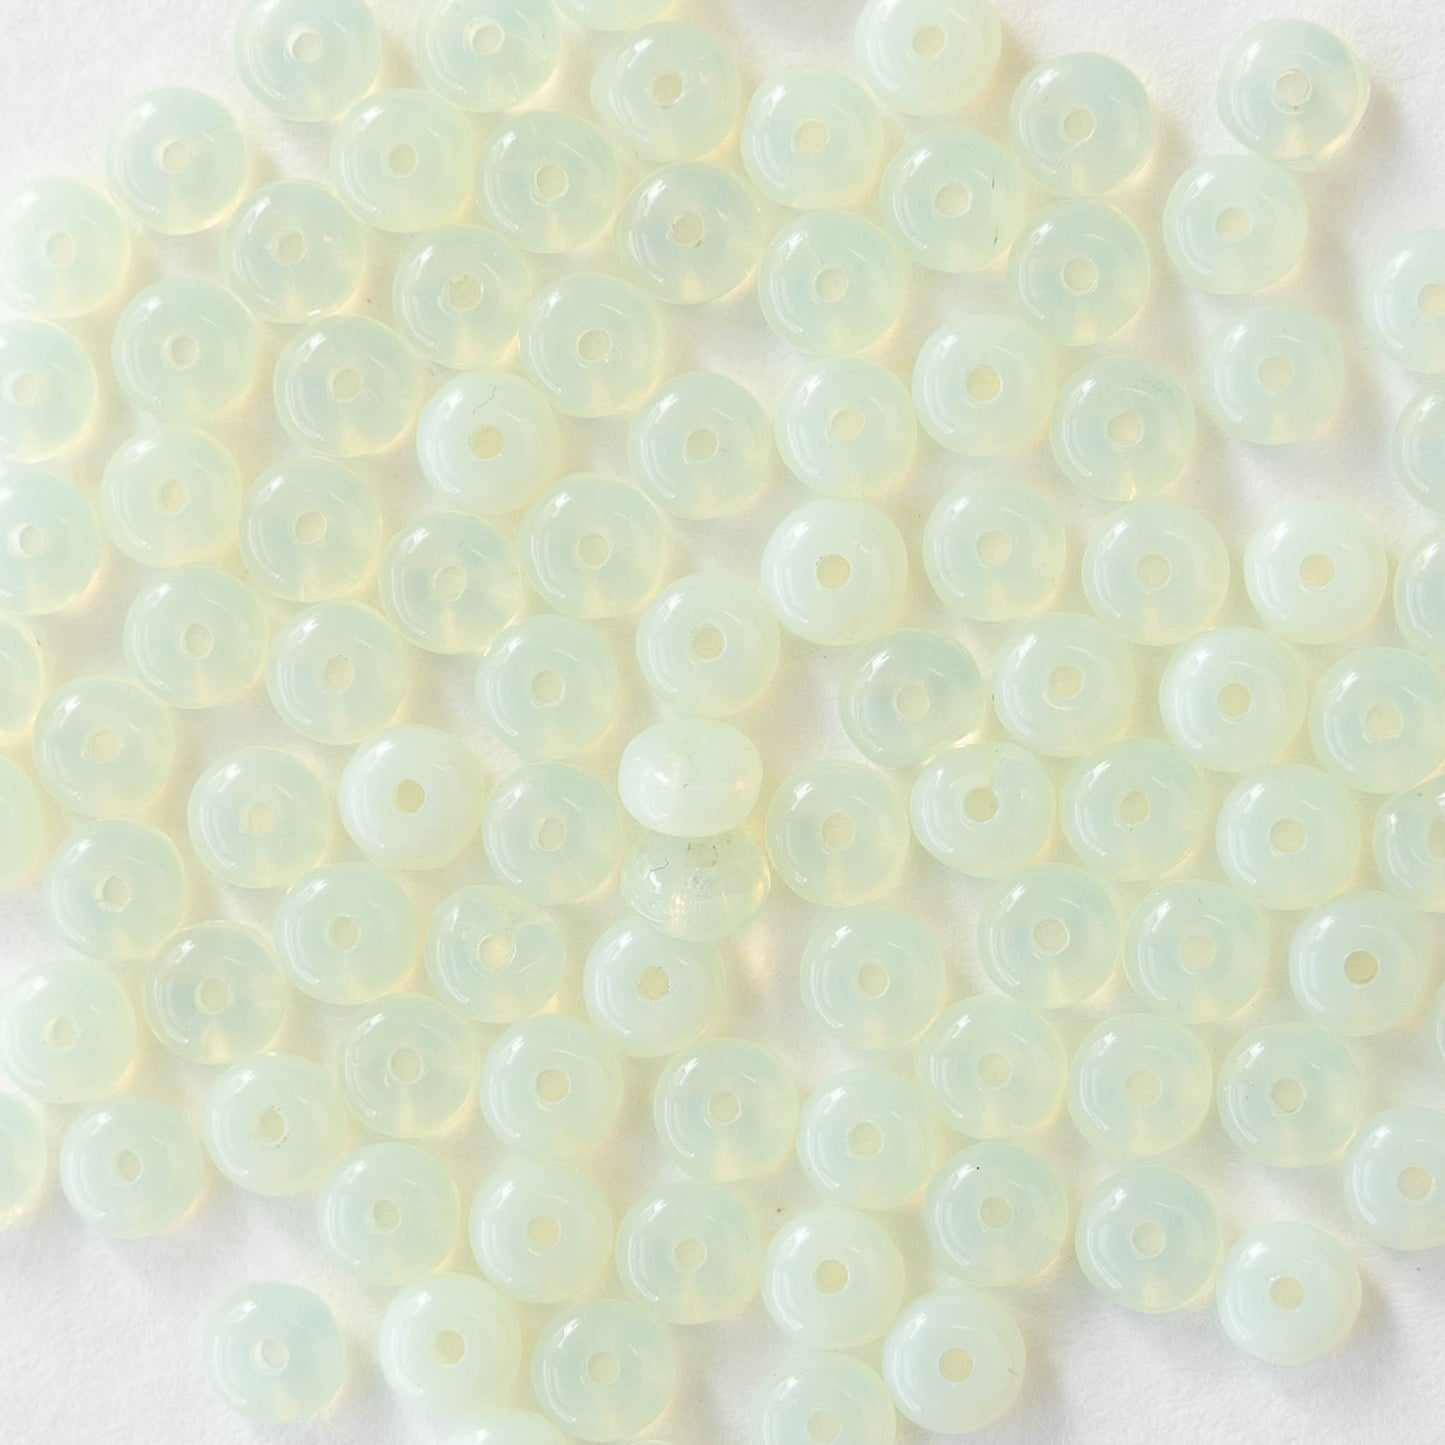 4mm Rondelle Beads - Jonquil Opaline - 100 Beads